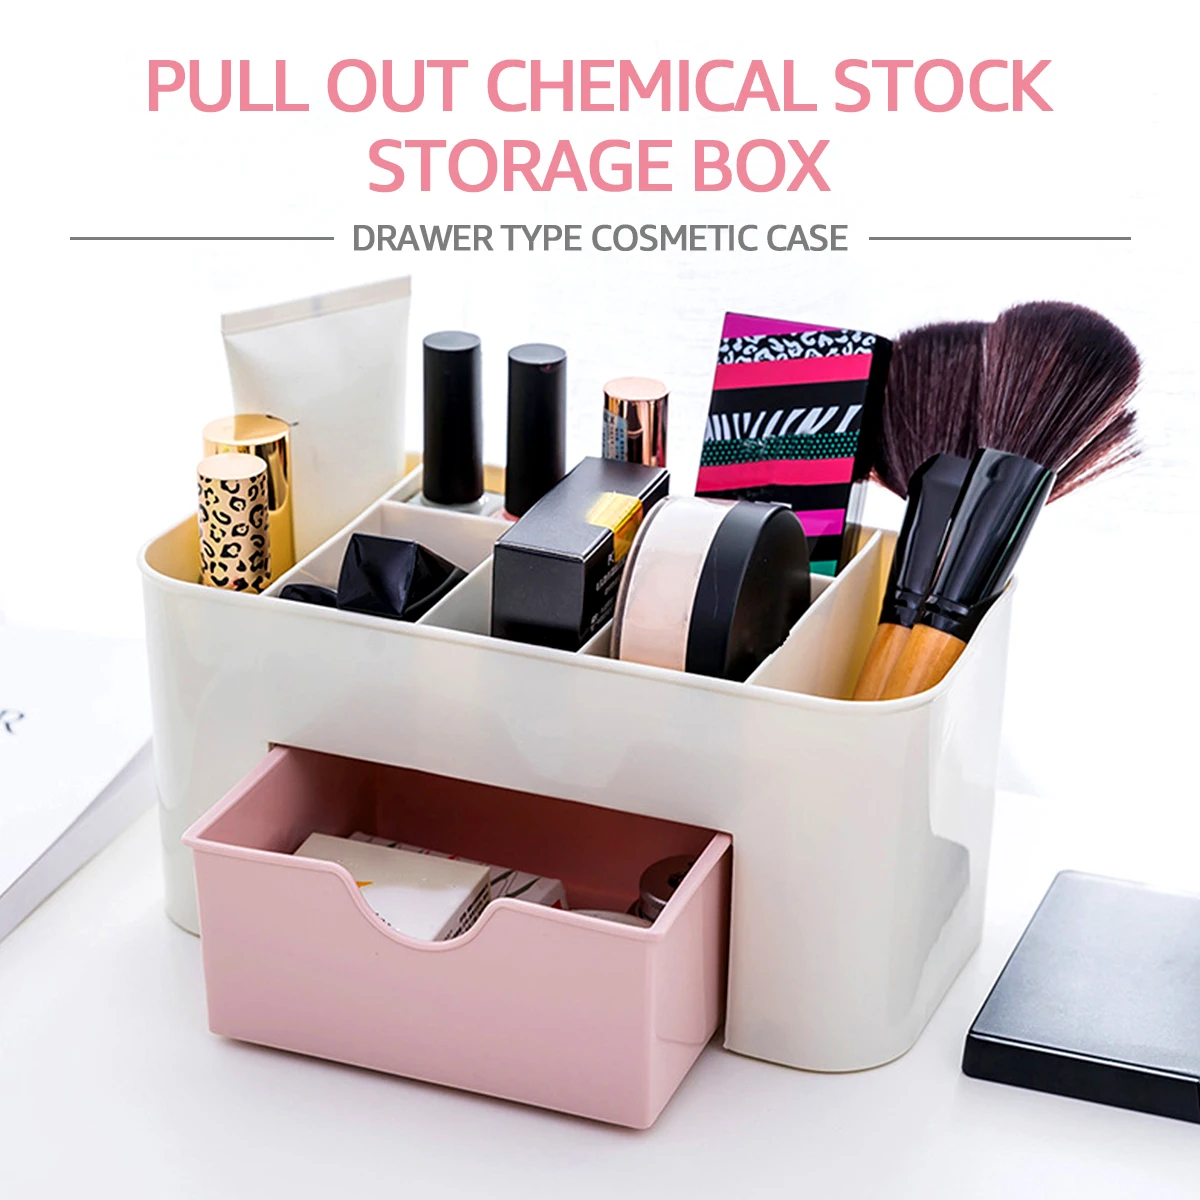 

Cosmetic Storage Box Plastic Makeup Organizer with Drawers for Jewelry Skin Care Nail Polish Brushes for Desk Dresser